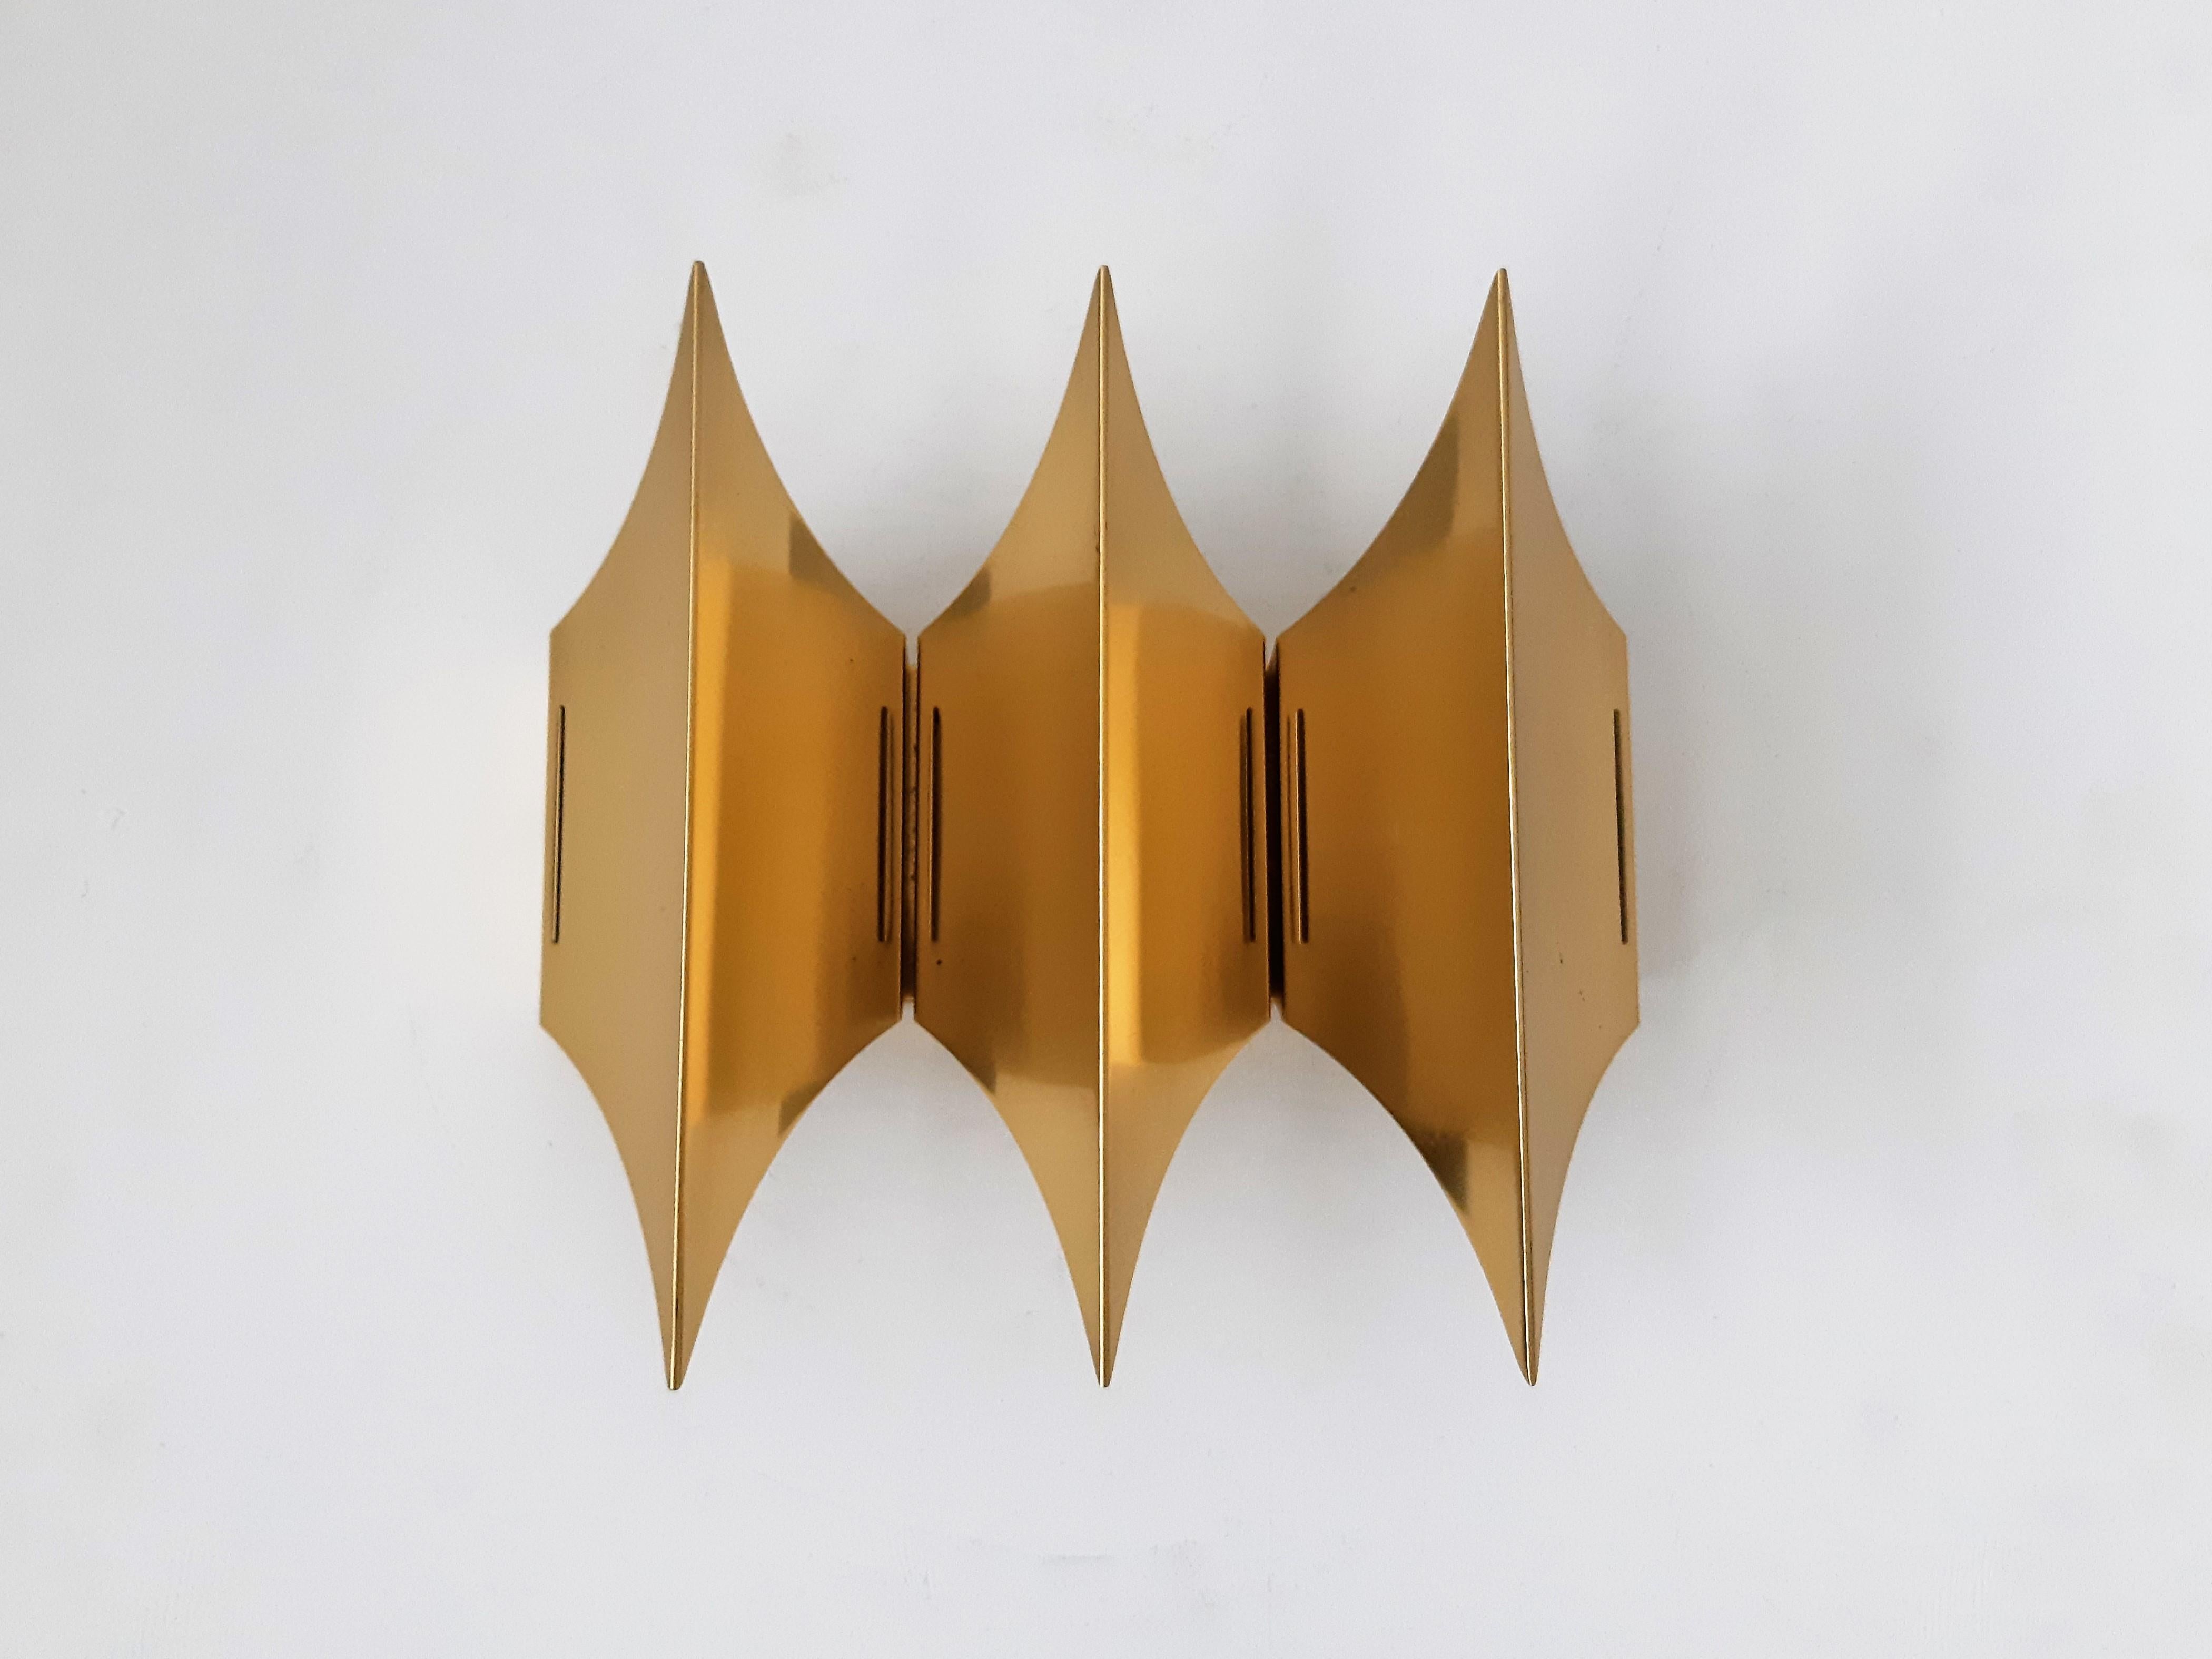 This fantastic Gothic III wall lamp was designed for Lyfa in the 1960's. It has a solid brass triplet shade, in the shape of the gothic architectural style that flourished throughout Europe from the 12th to the 16th century. It gives a beautiful and